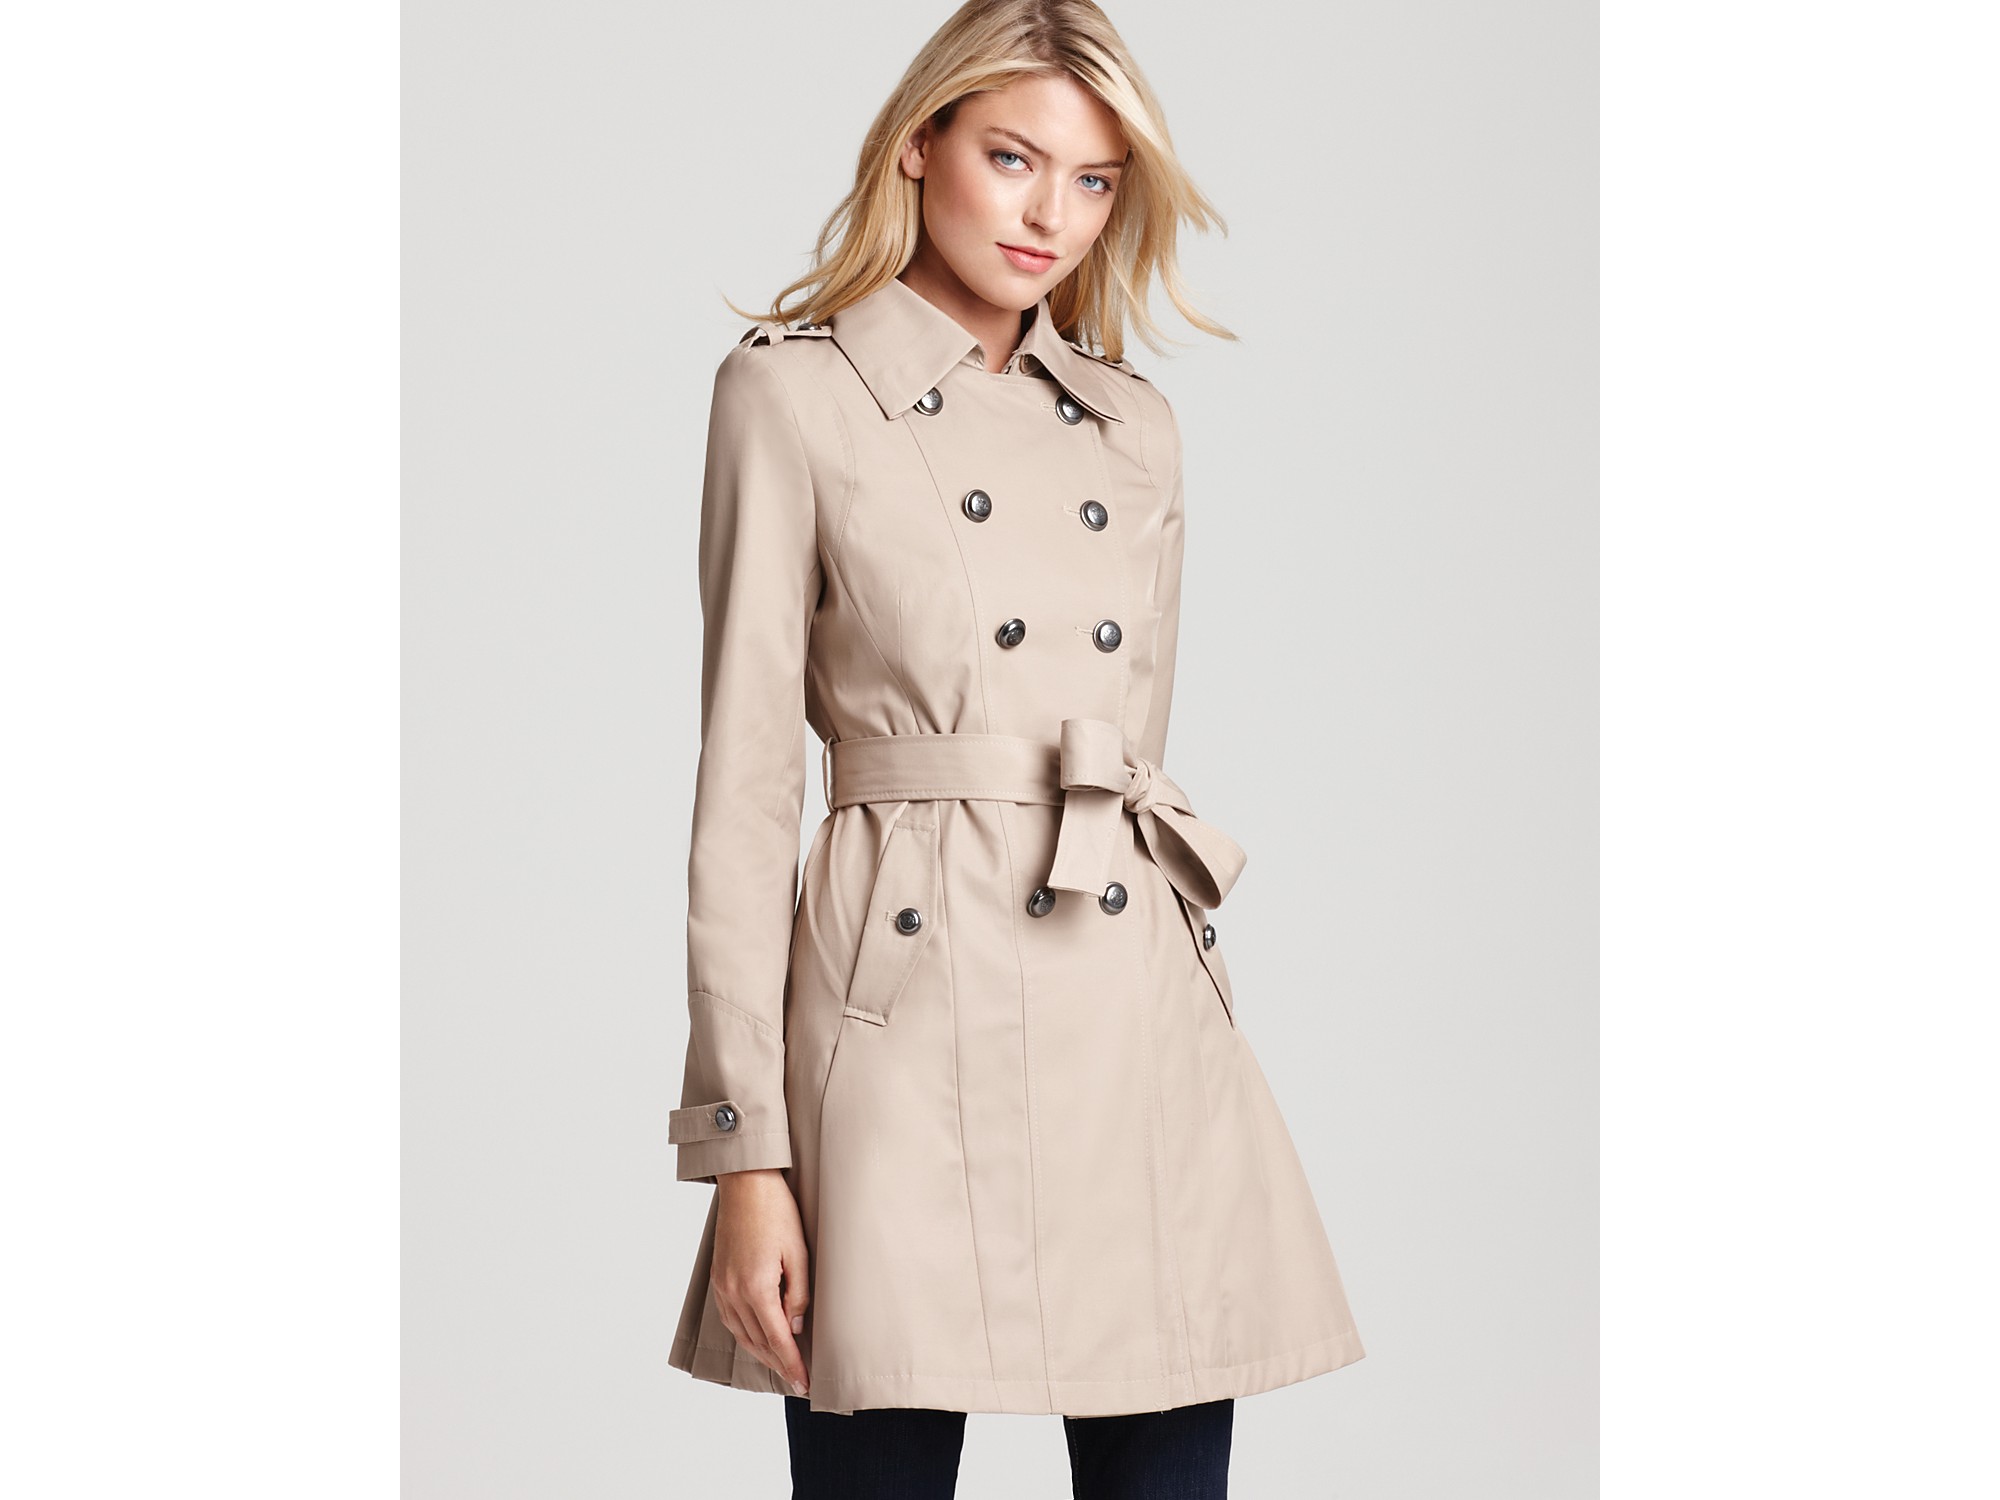 Via Spiga Double-breasted Military Trench Coat in Sand (Black) - Lyst